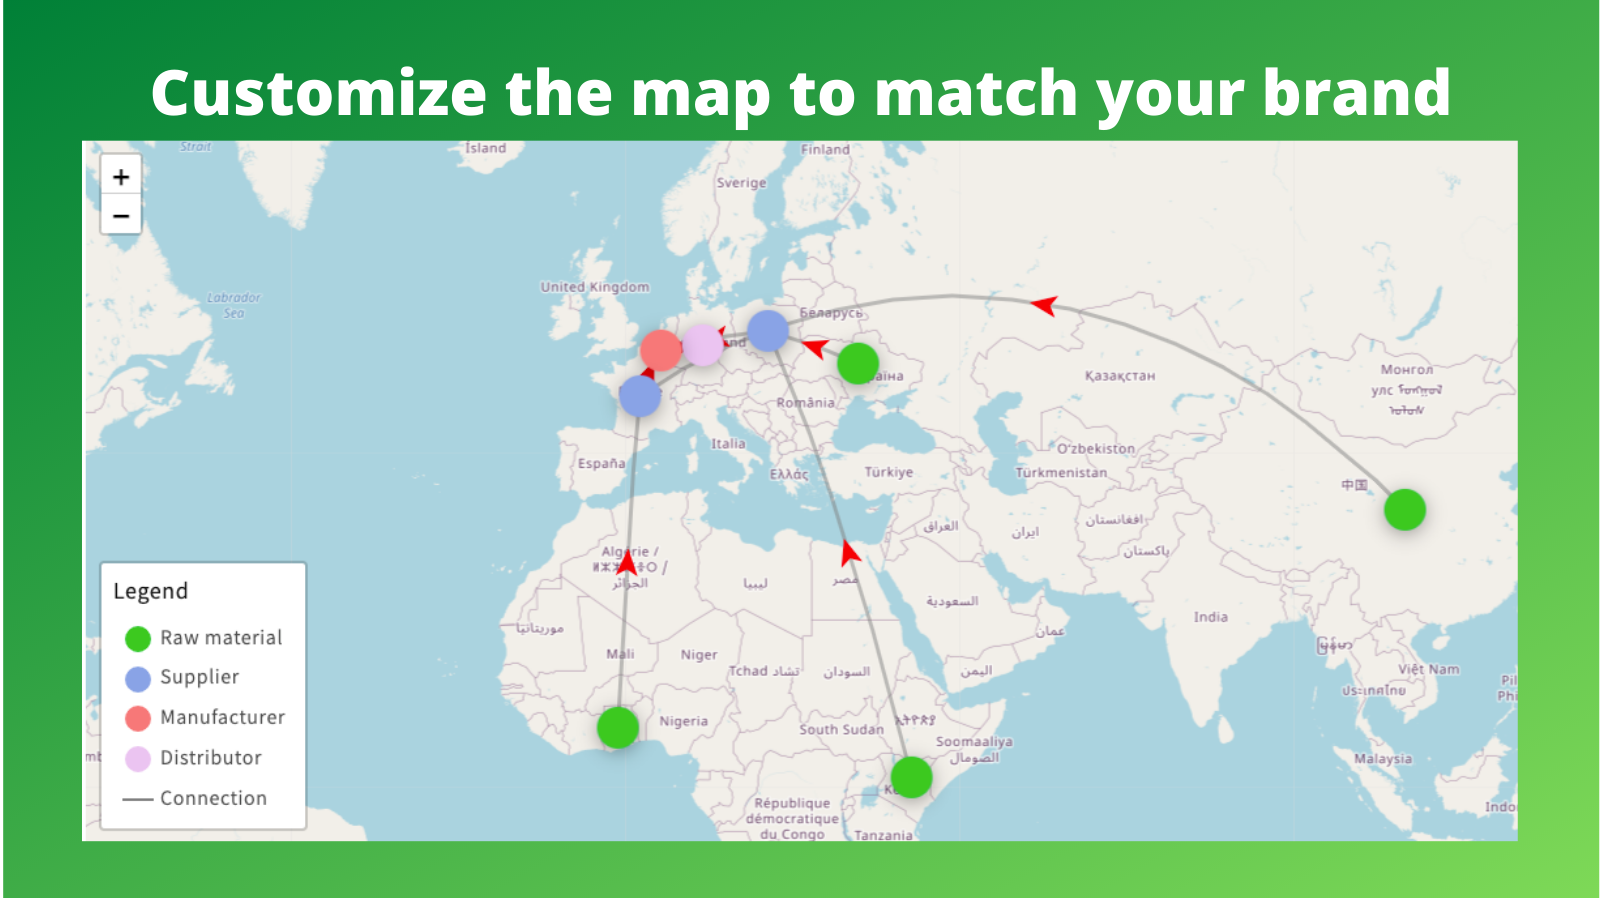 Customize the map to match your brand